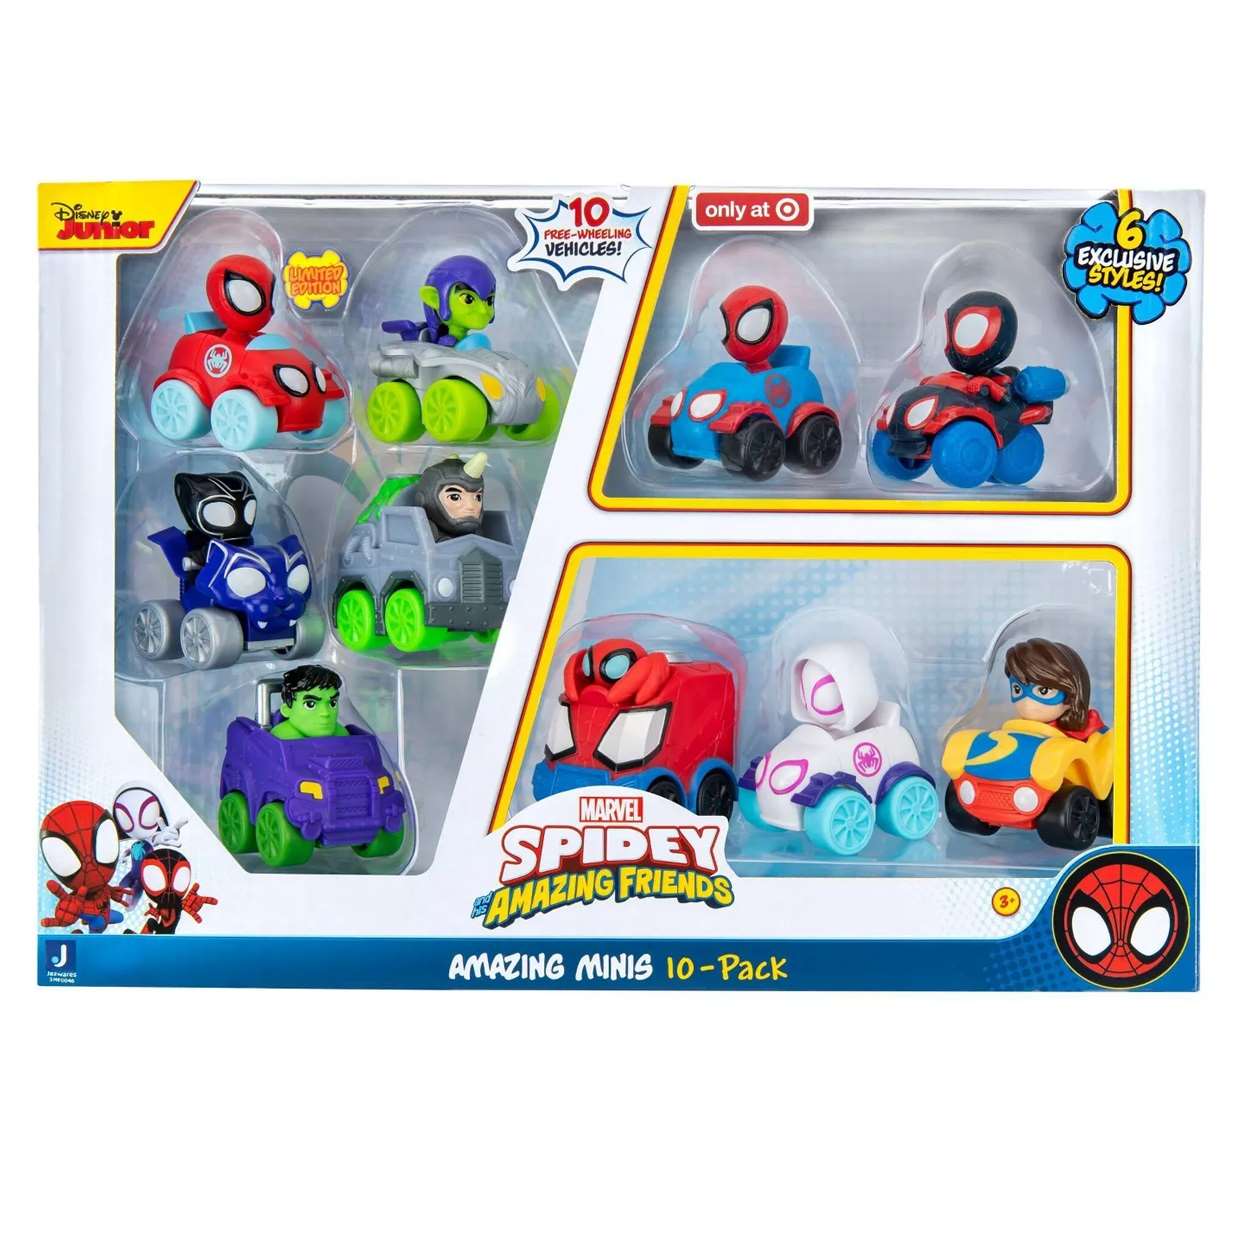 Pack 10 Amazing Minis Vehicles Disney Junior Only Target